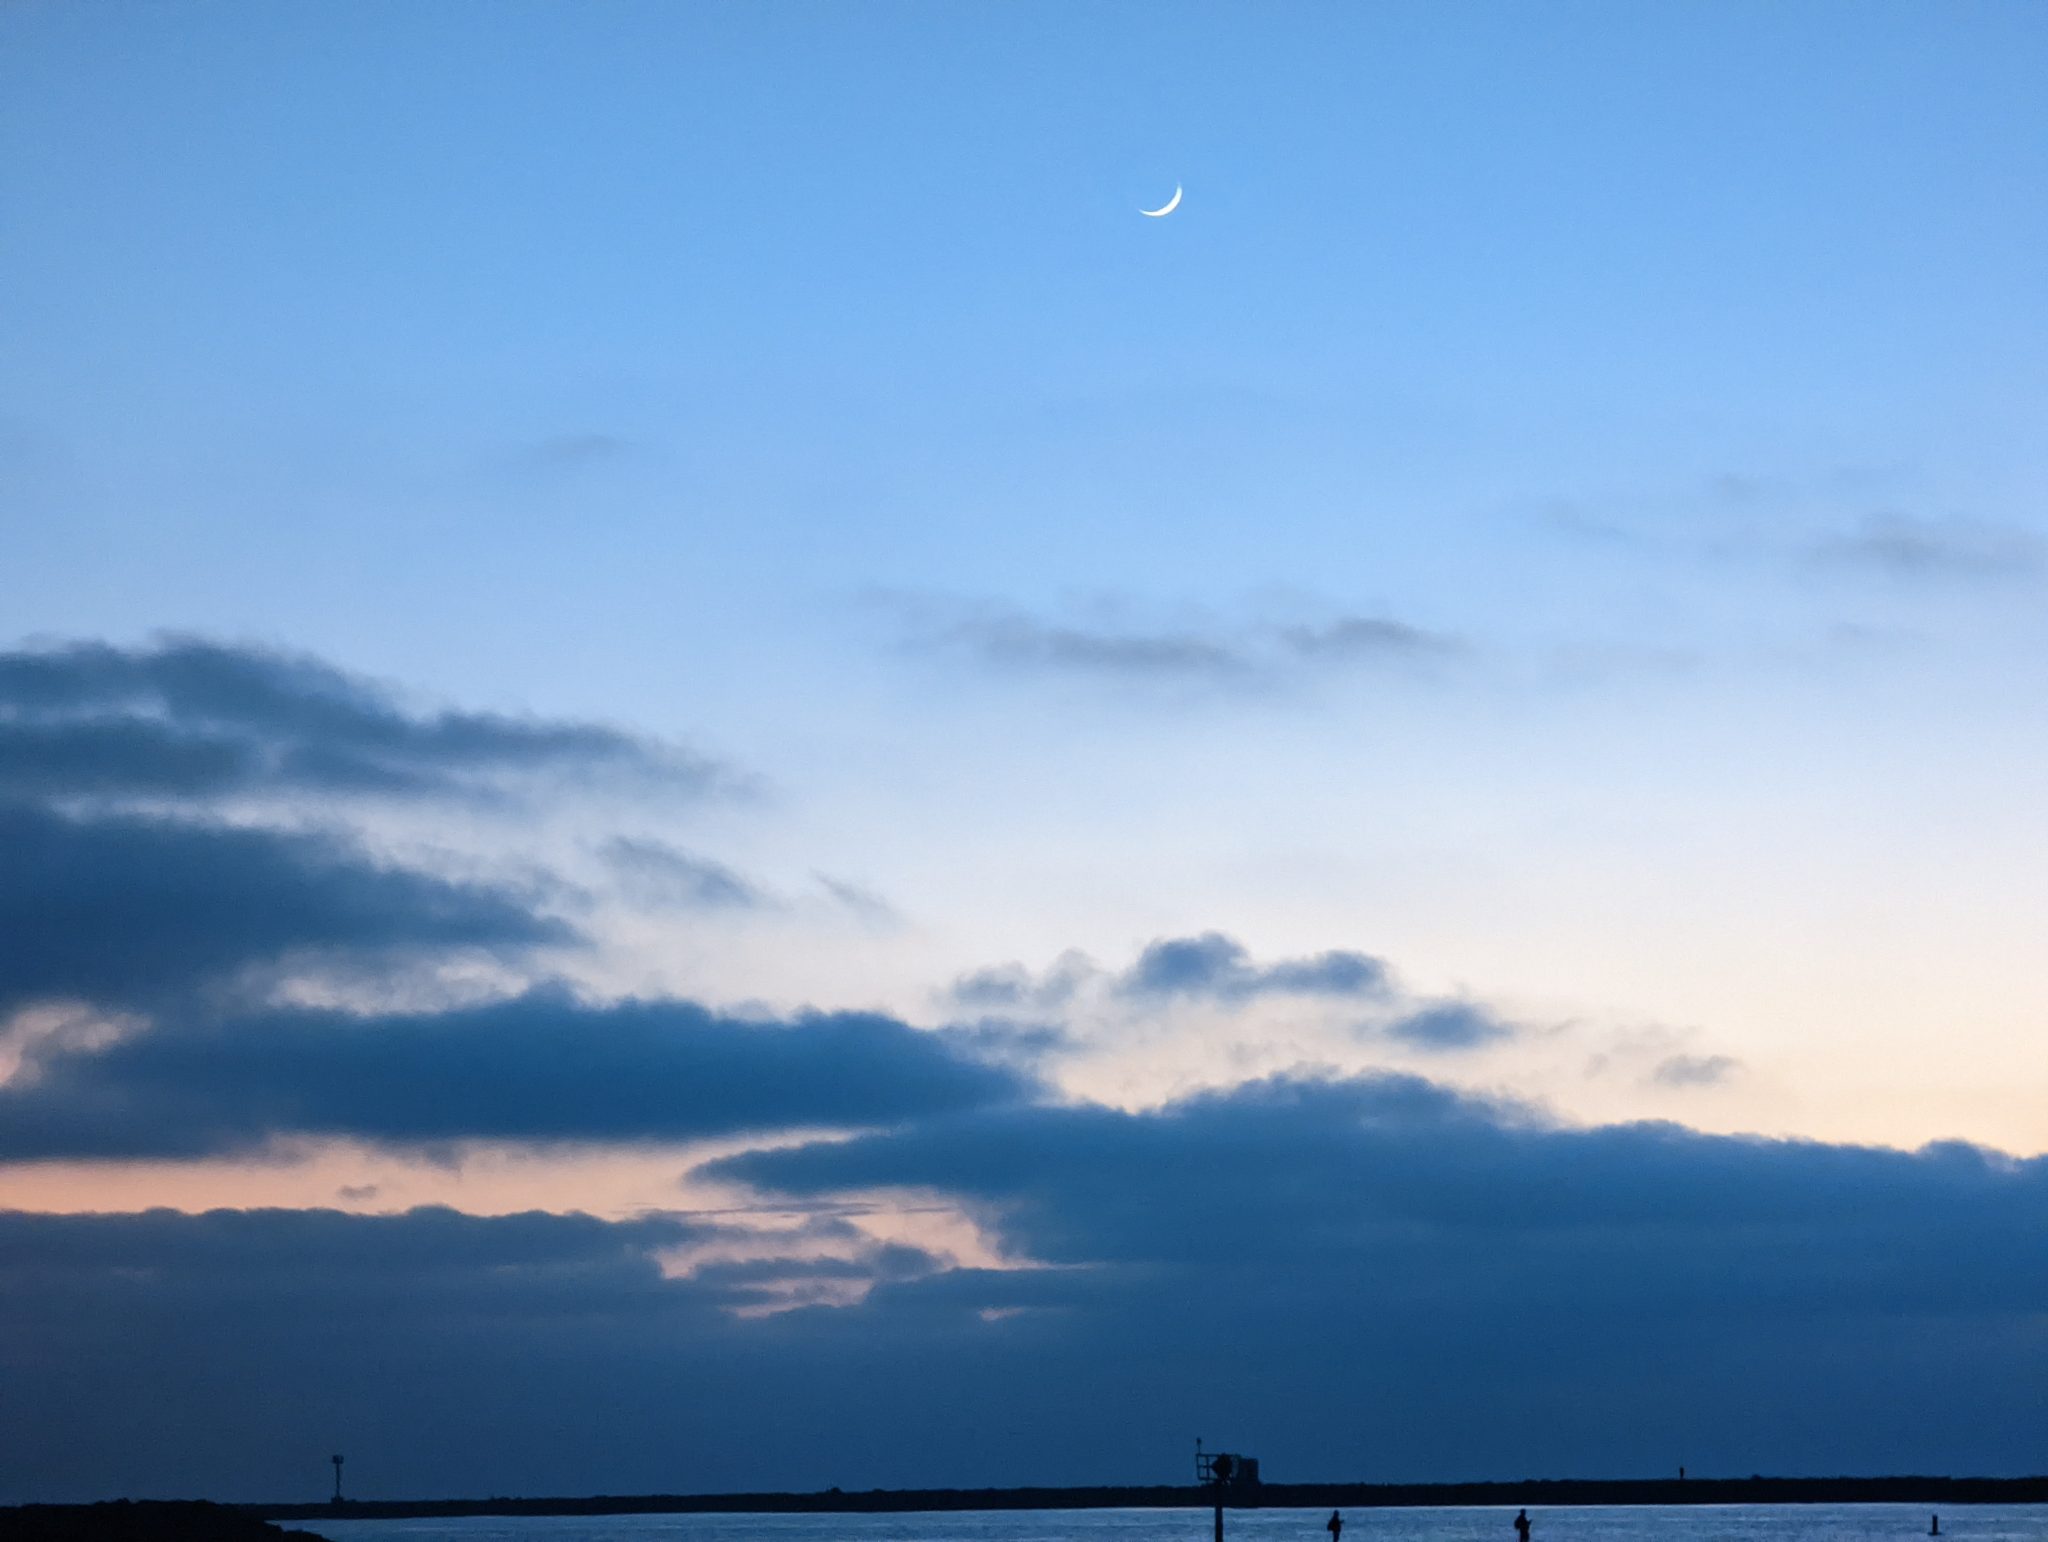 quarter moon at sunset, blue and violet tones, viewed from Dog Beach, Ocean Beach, San Diego,California.